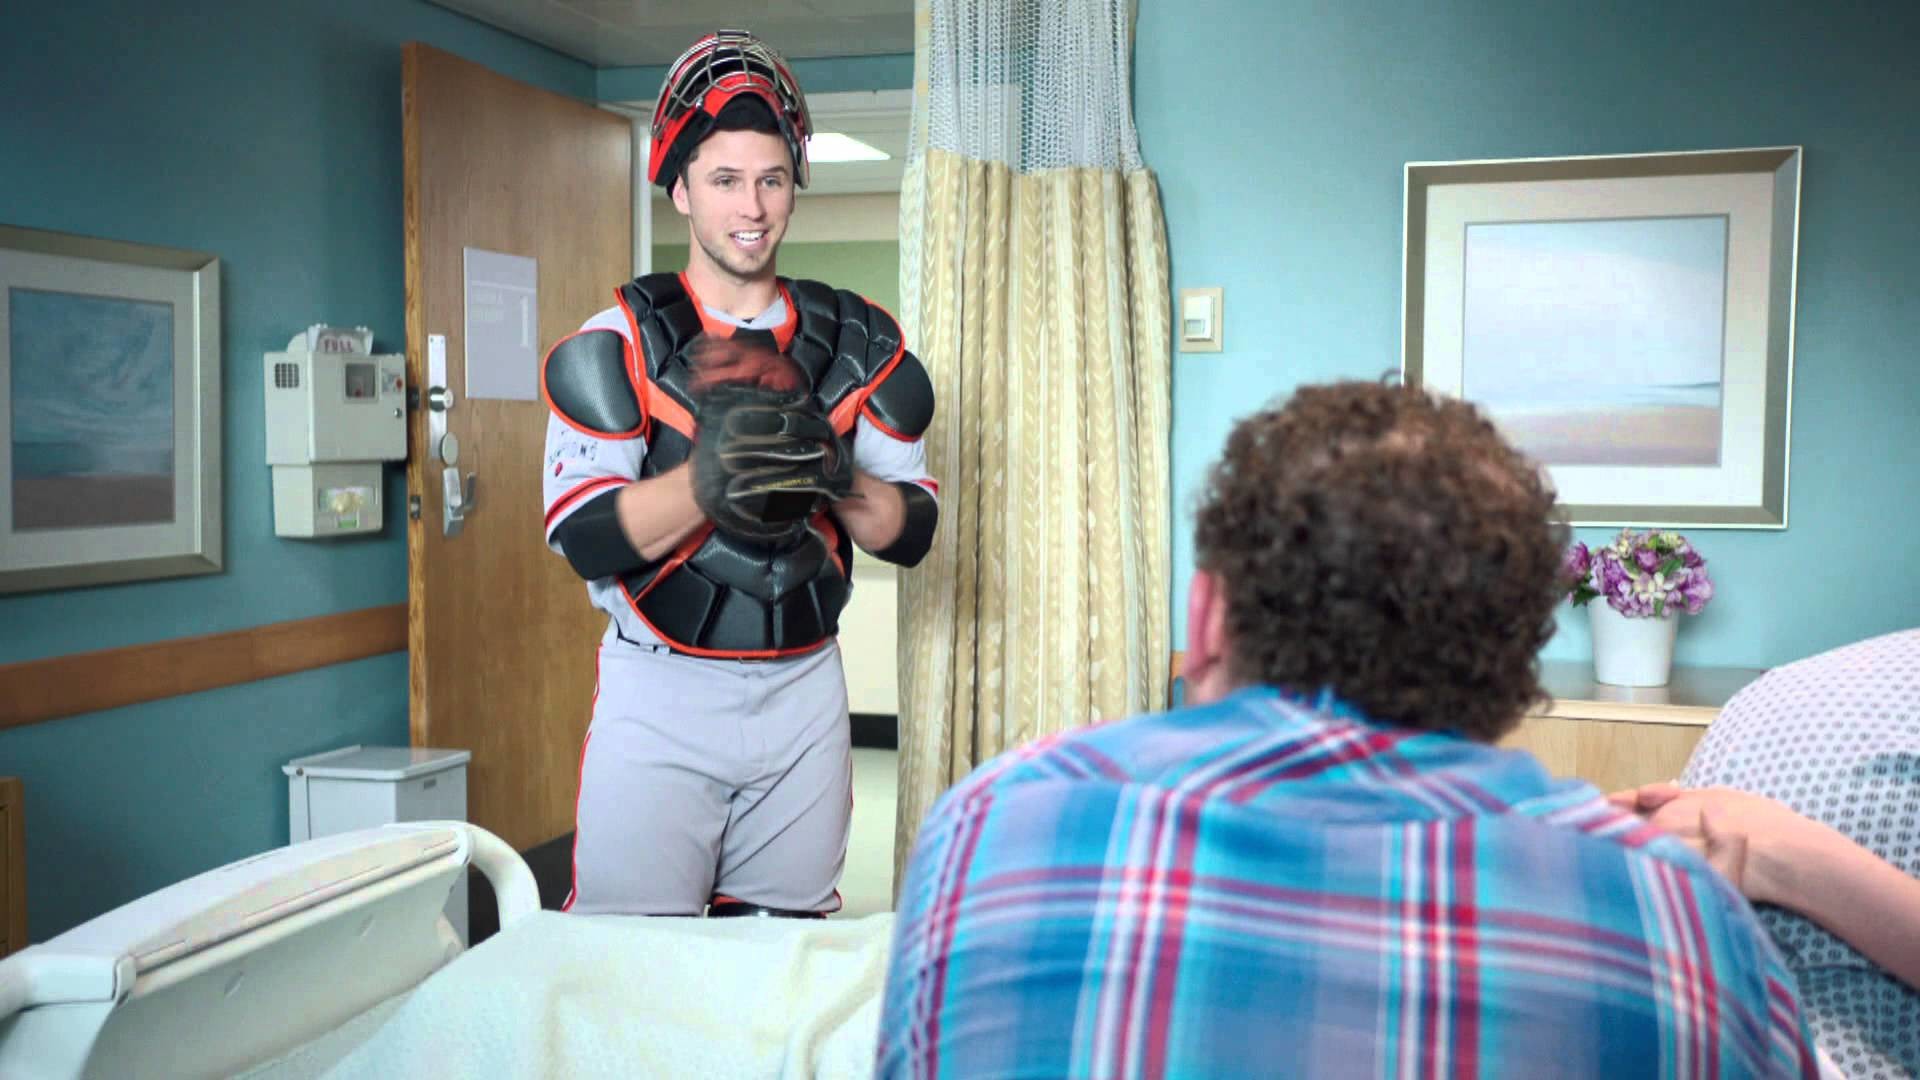 1920x1080 Buster Posey, M.D.: The Great Divide - YouTube